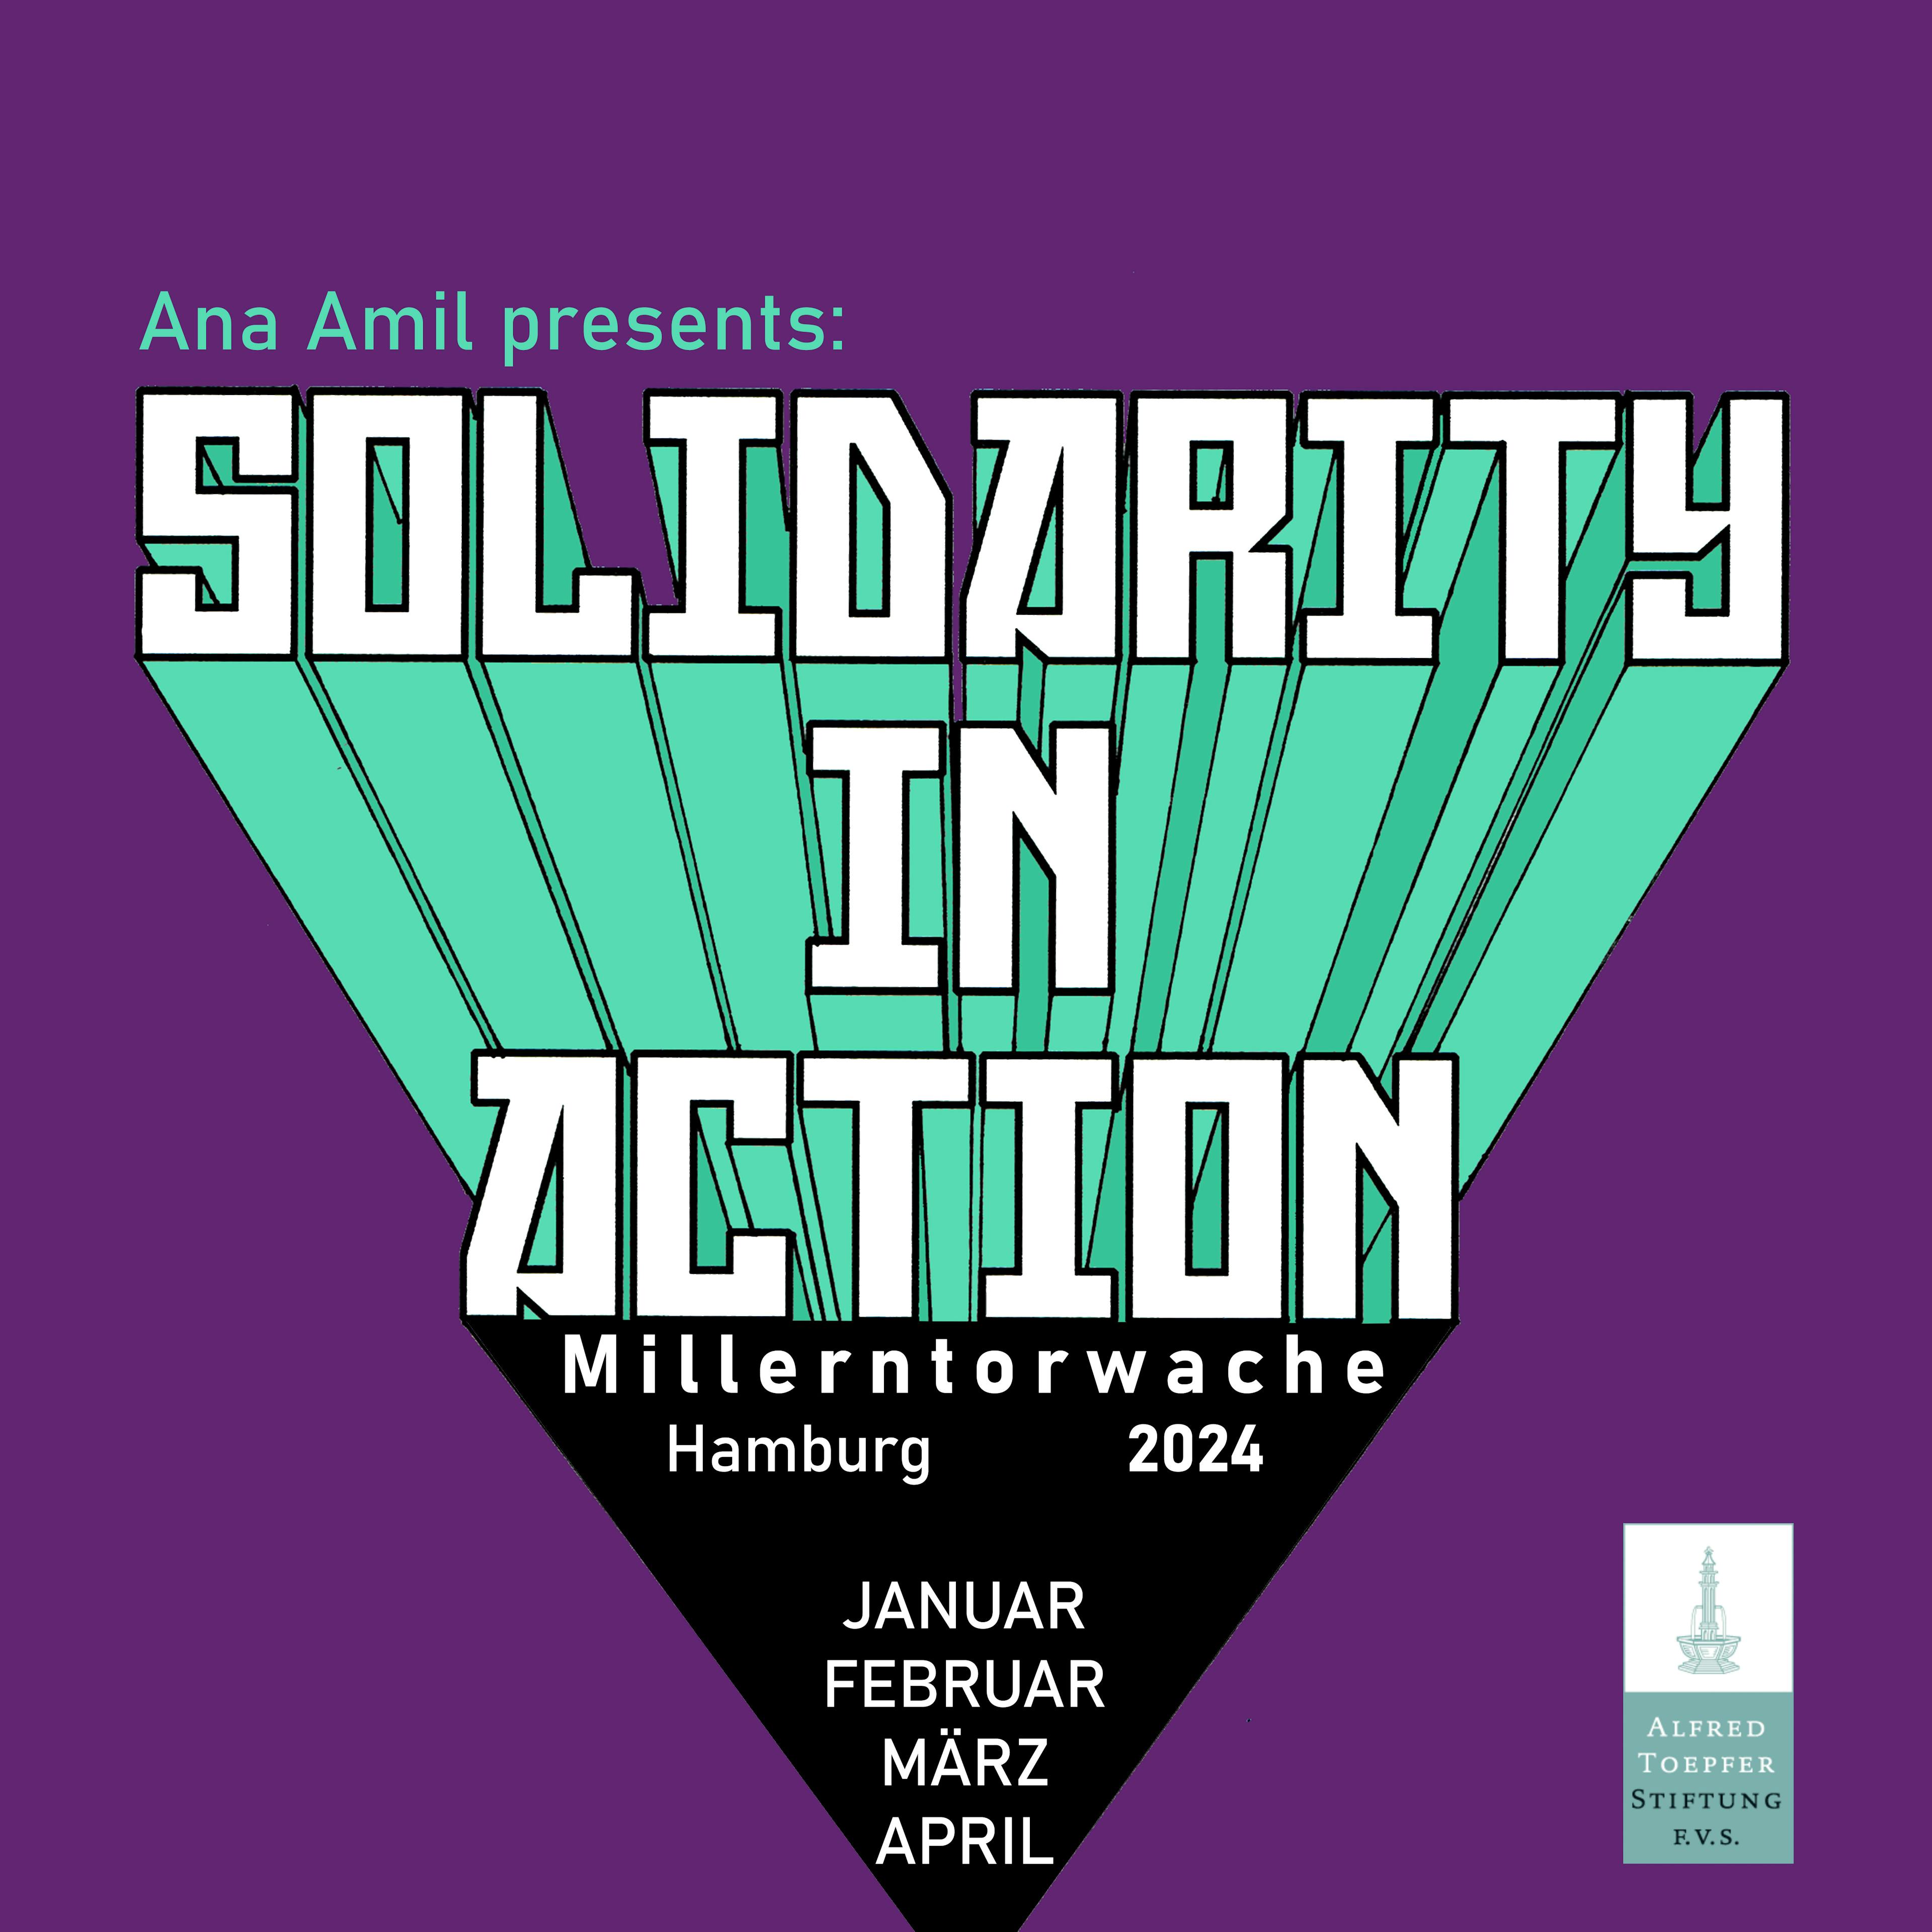 Alfred Toepfer Stiftung F.V.S. | Solidarity in Action